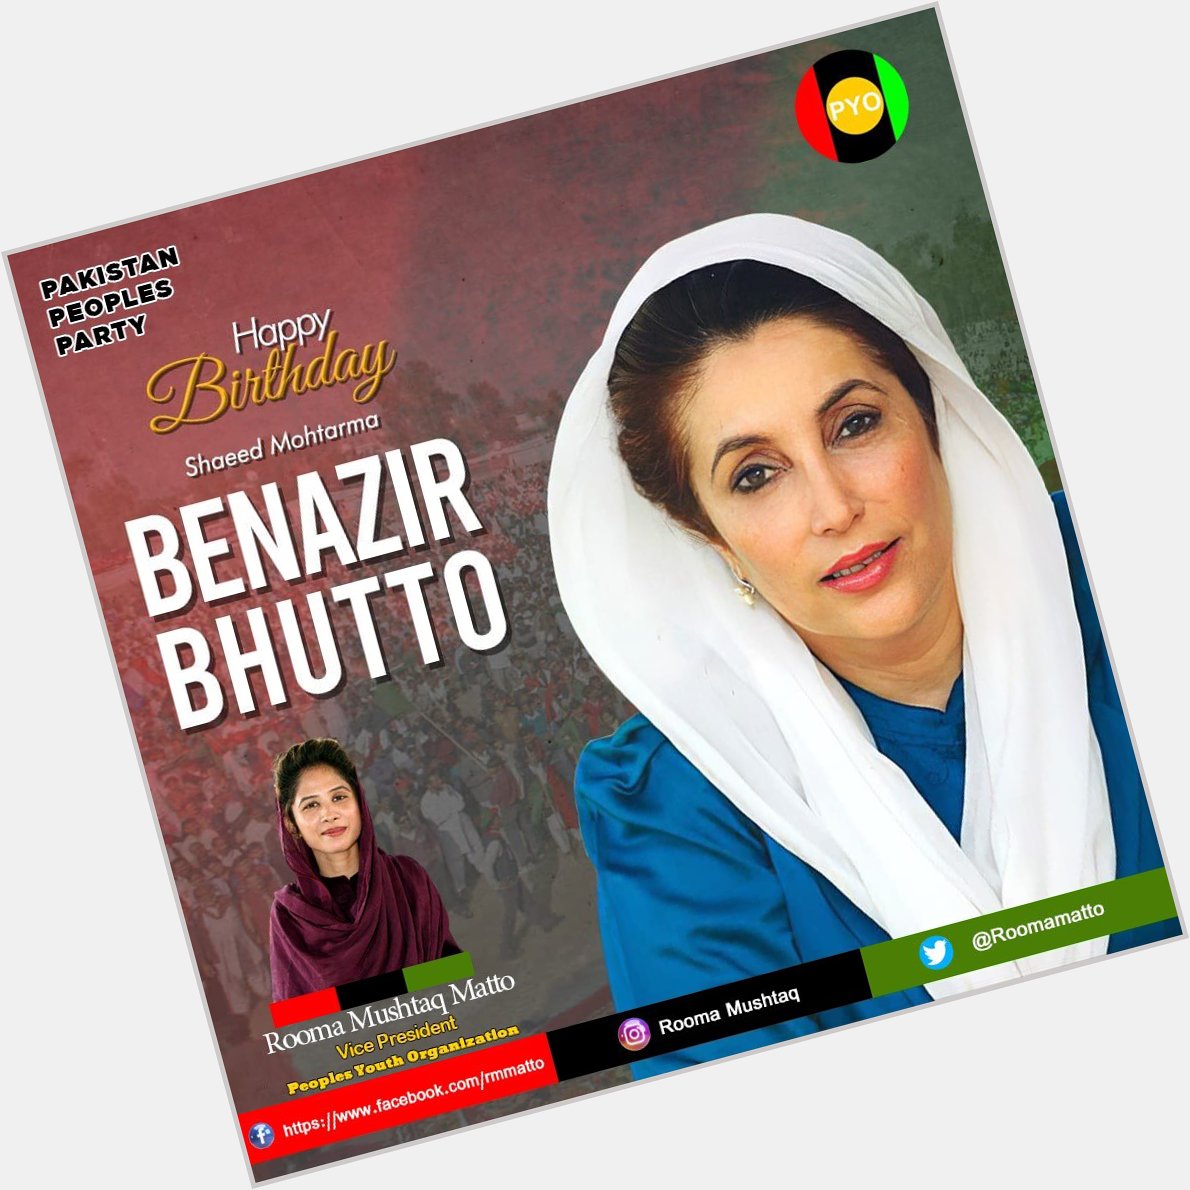 Happy 70th Birthday to Benazir Bhutto Sahiba. The Queen, the queen of hearts. 